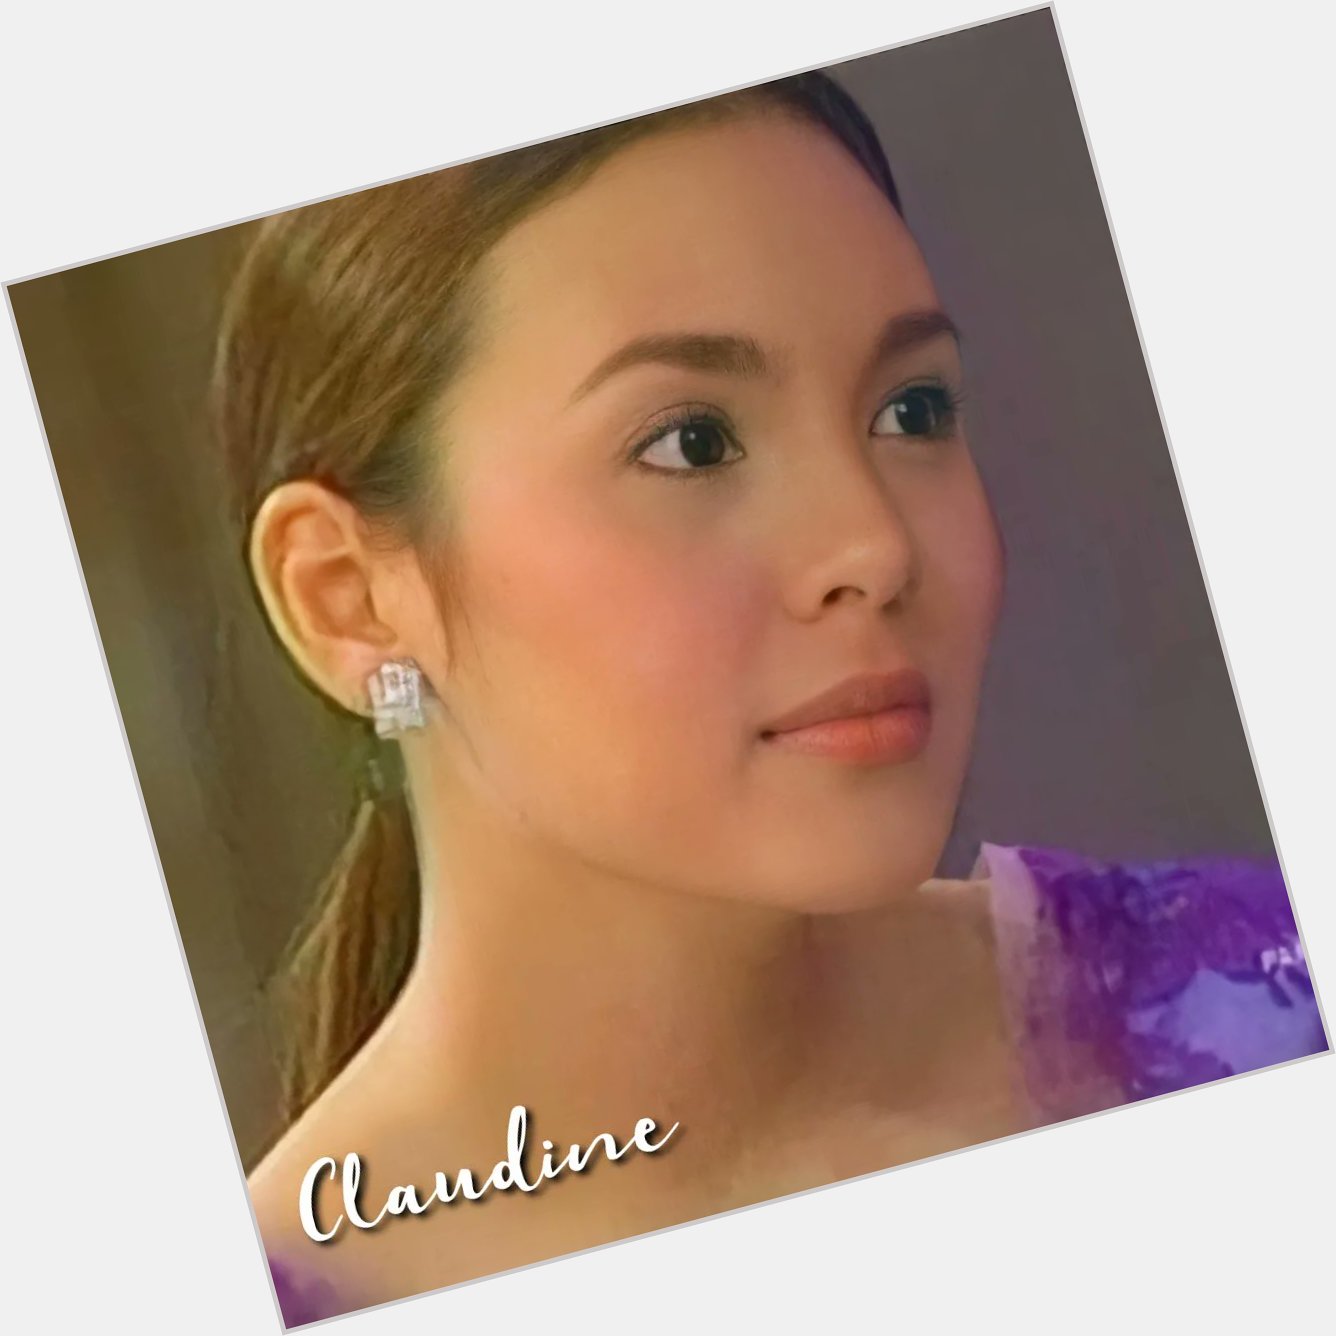 Advance happy birthday idol Claudine Barretto.   Tomorrow is your day!!!   God bless you.   